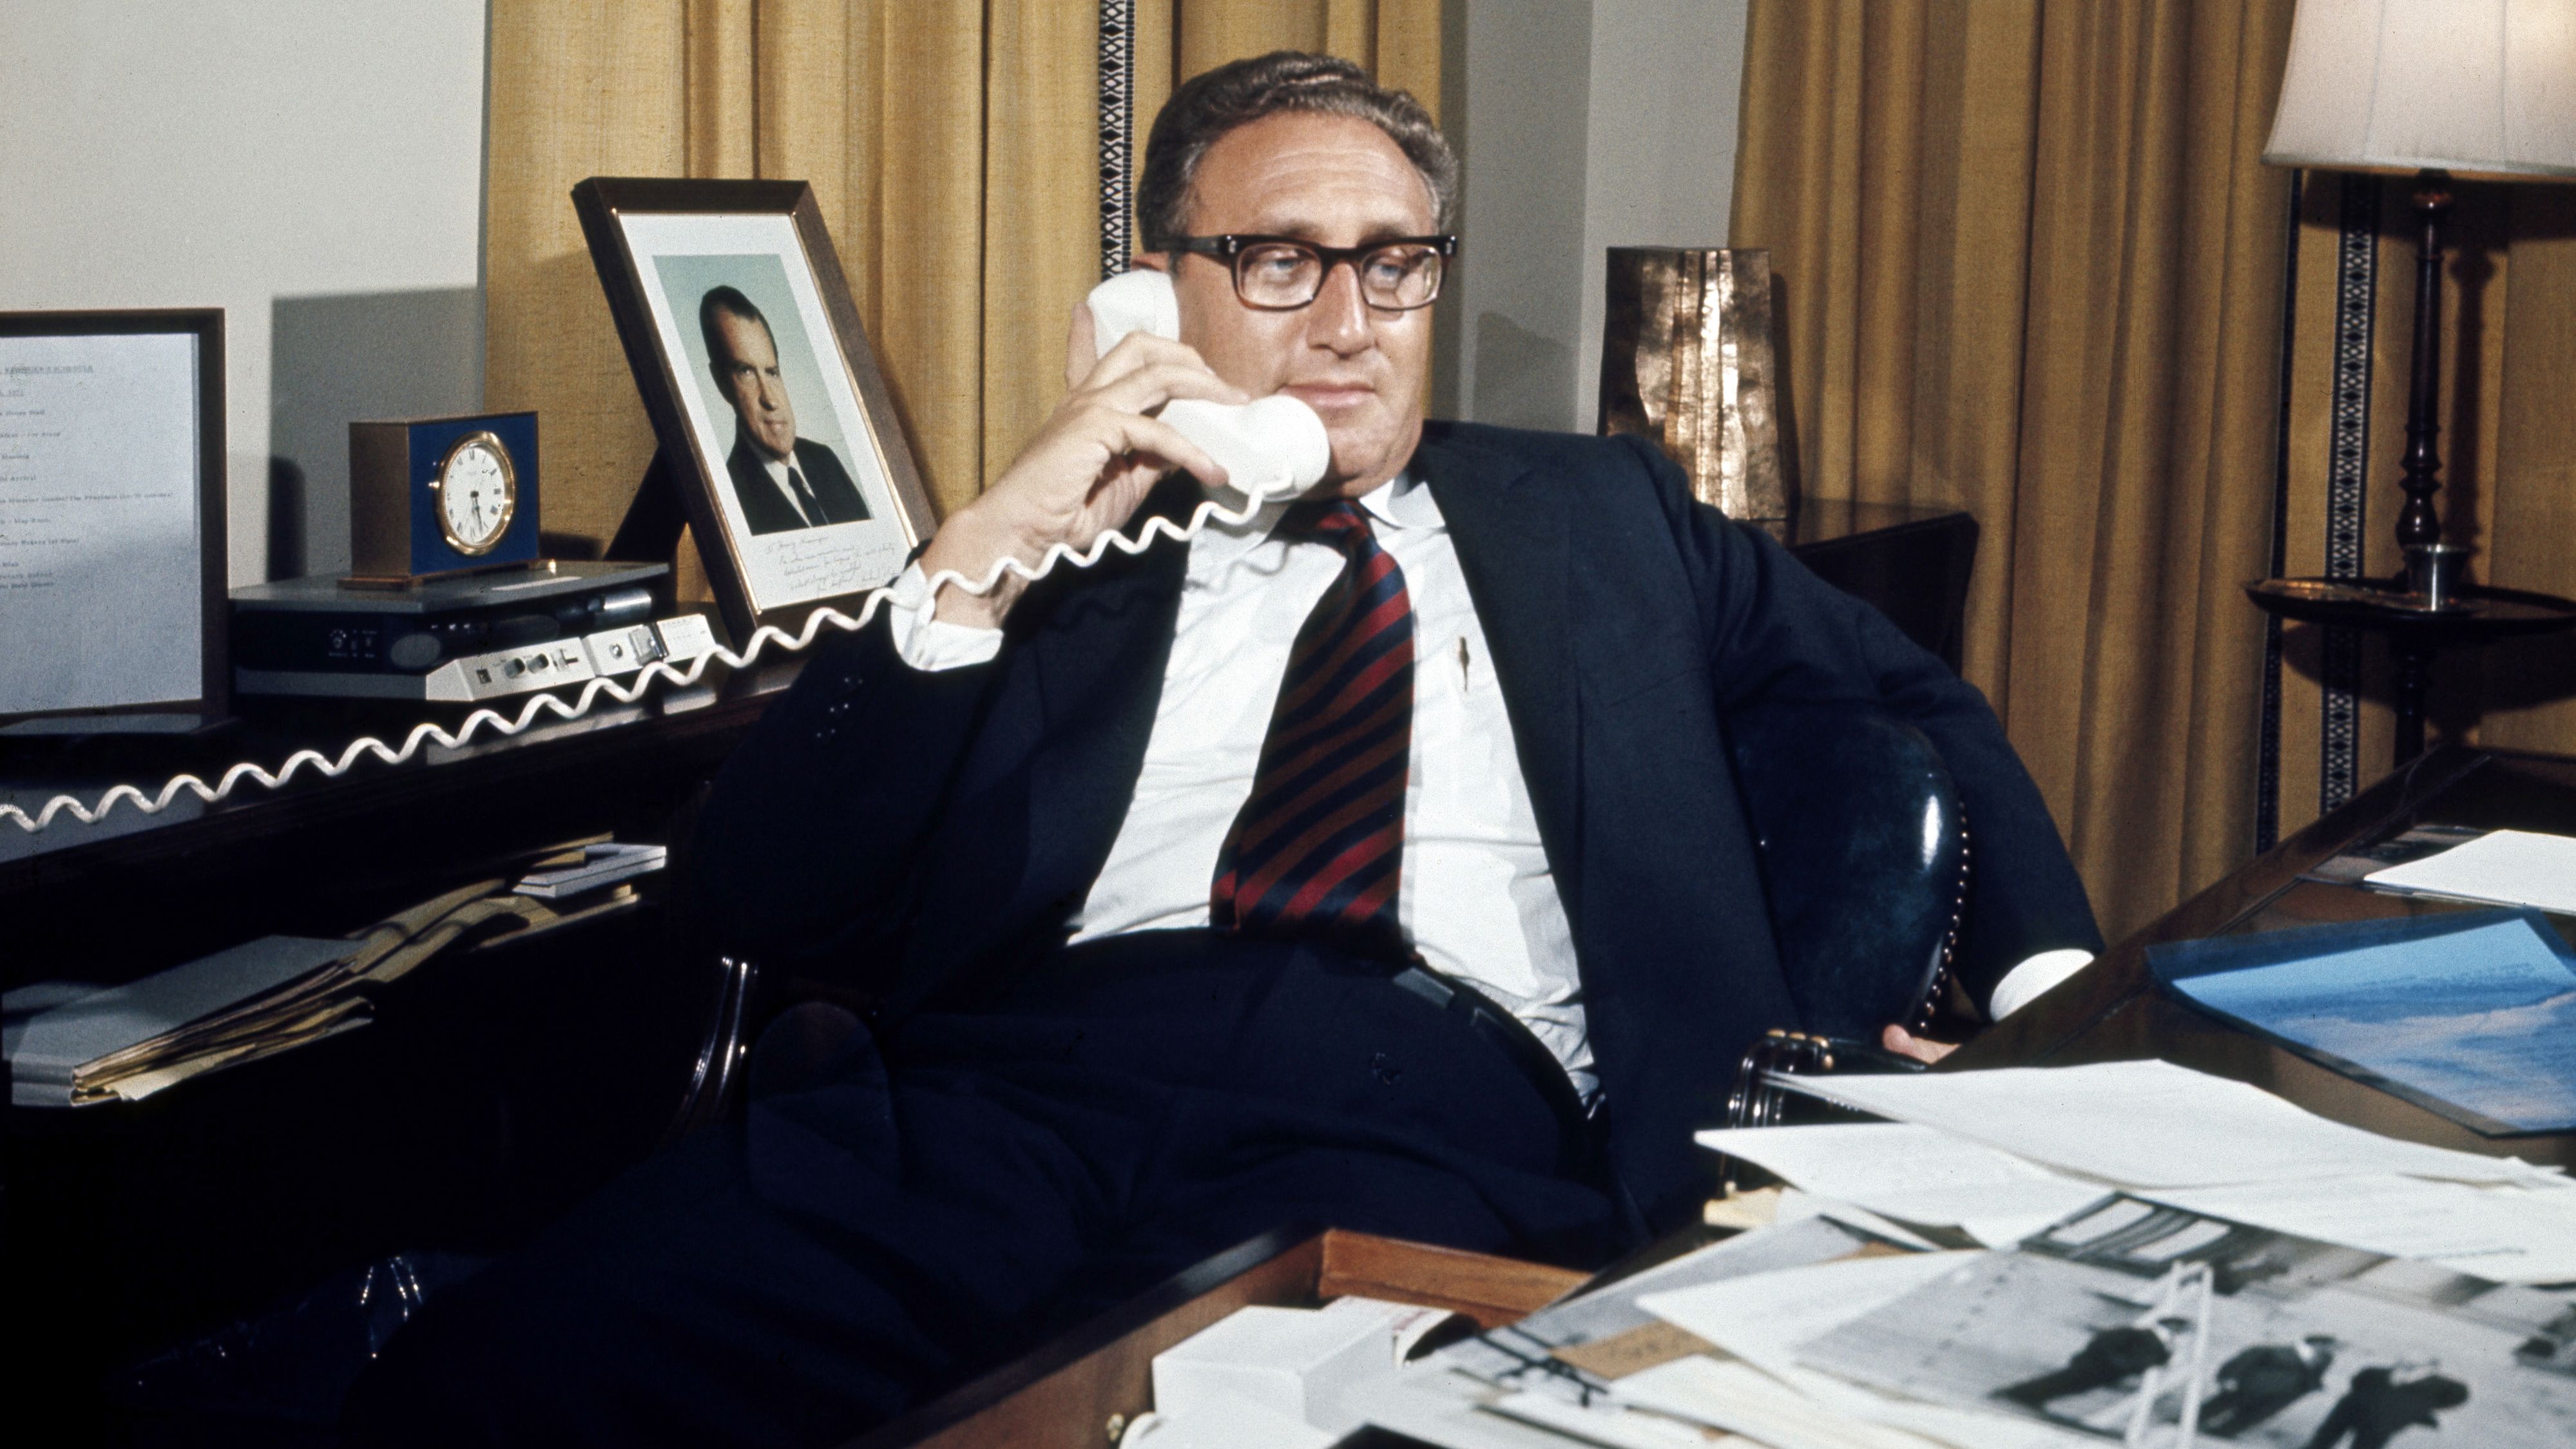 Kissinger takes a call in his office in the early 1970s.